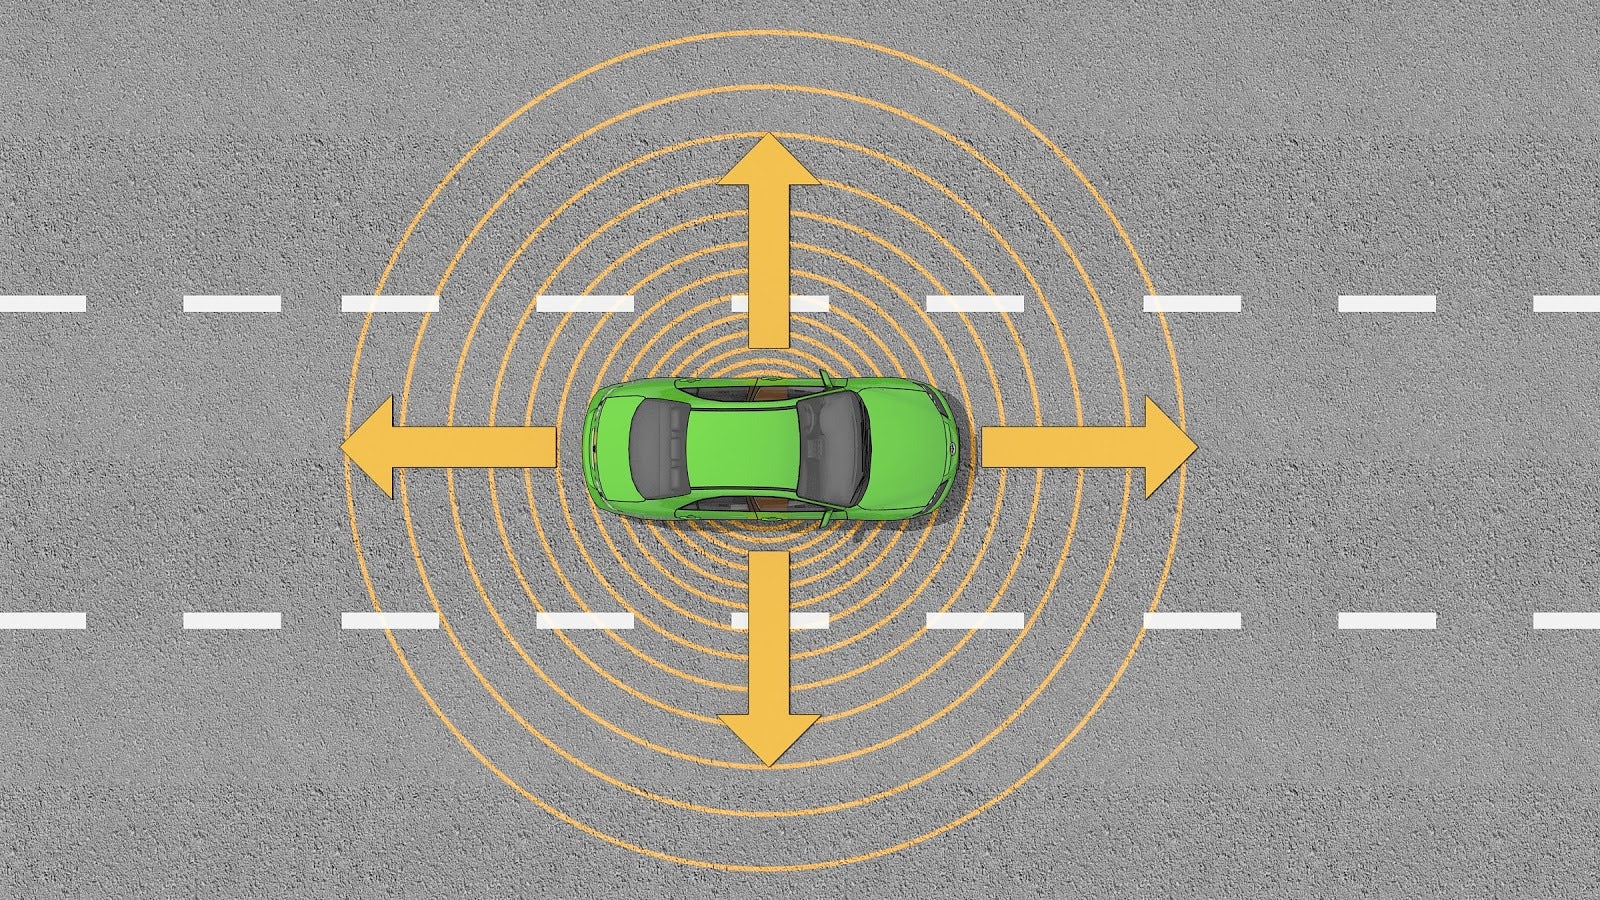 A BUFFER ZONE AROUND YOUR VEHICLE ALLOWS  YOU TO REACT TO POTENTIAL HAZARDS